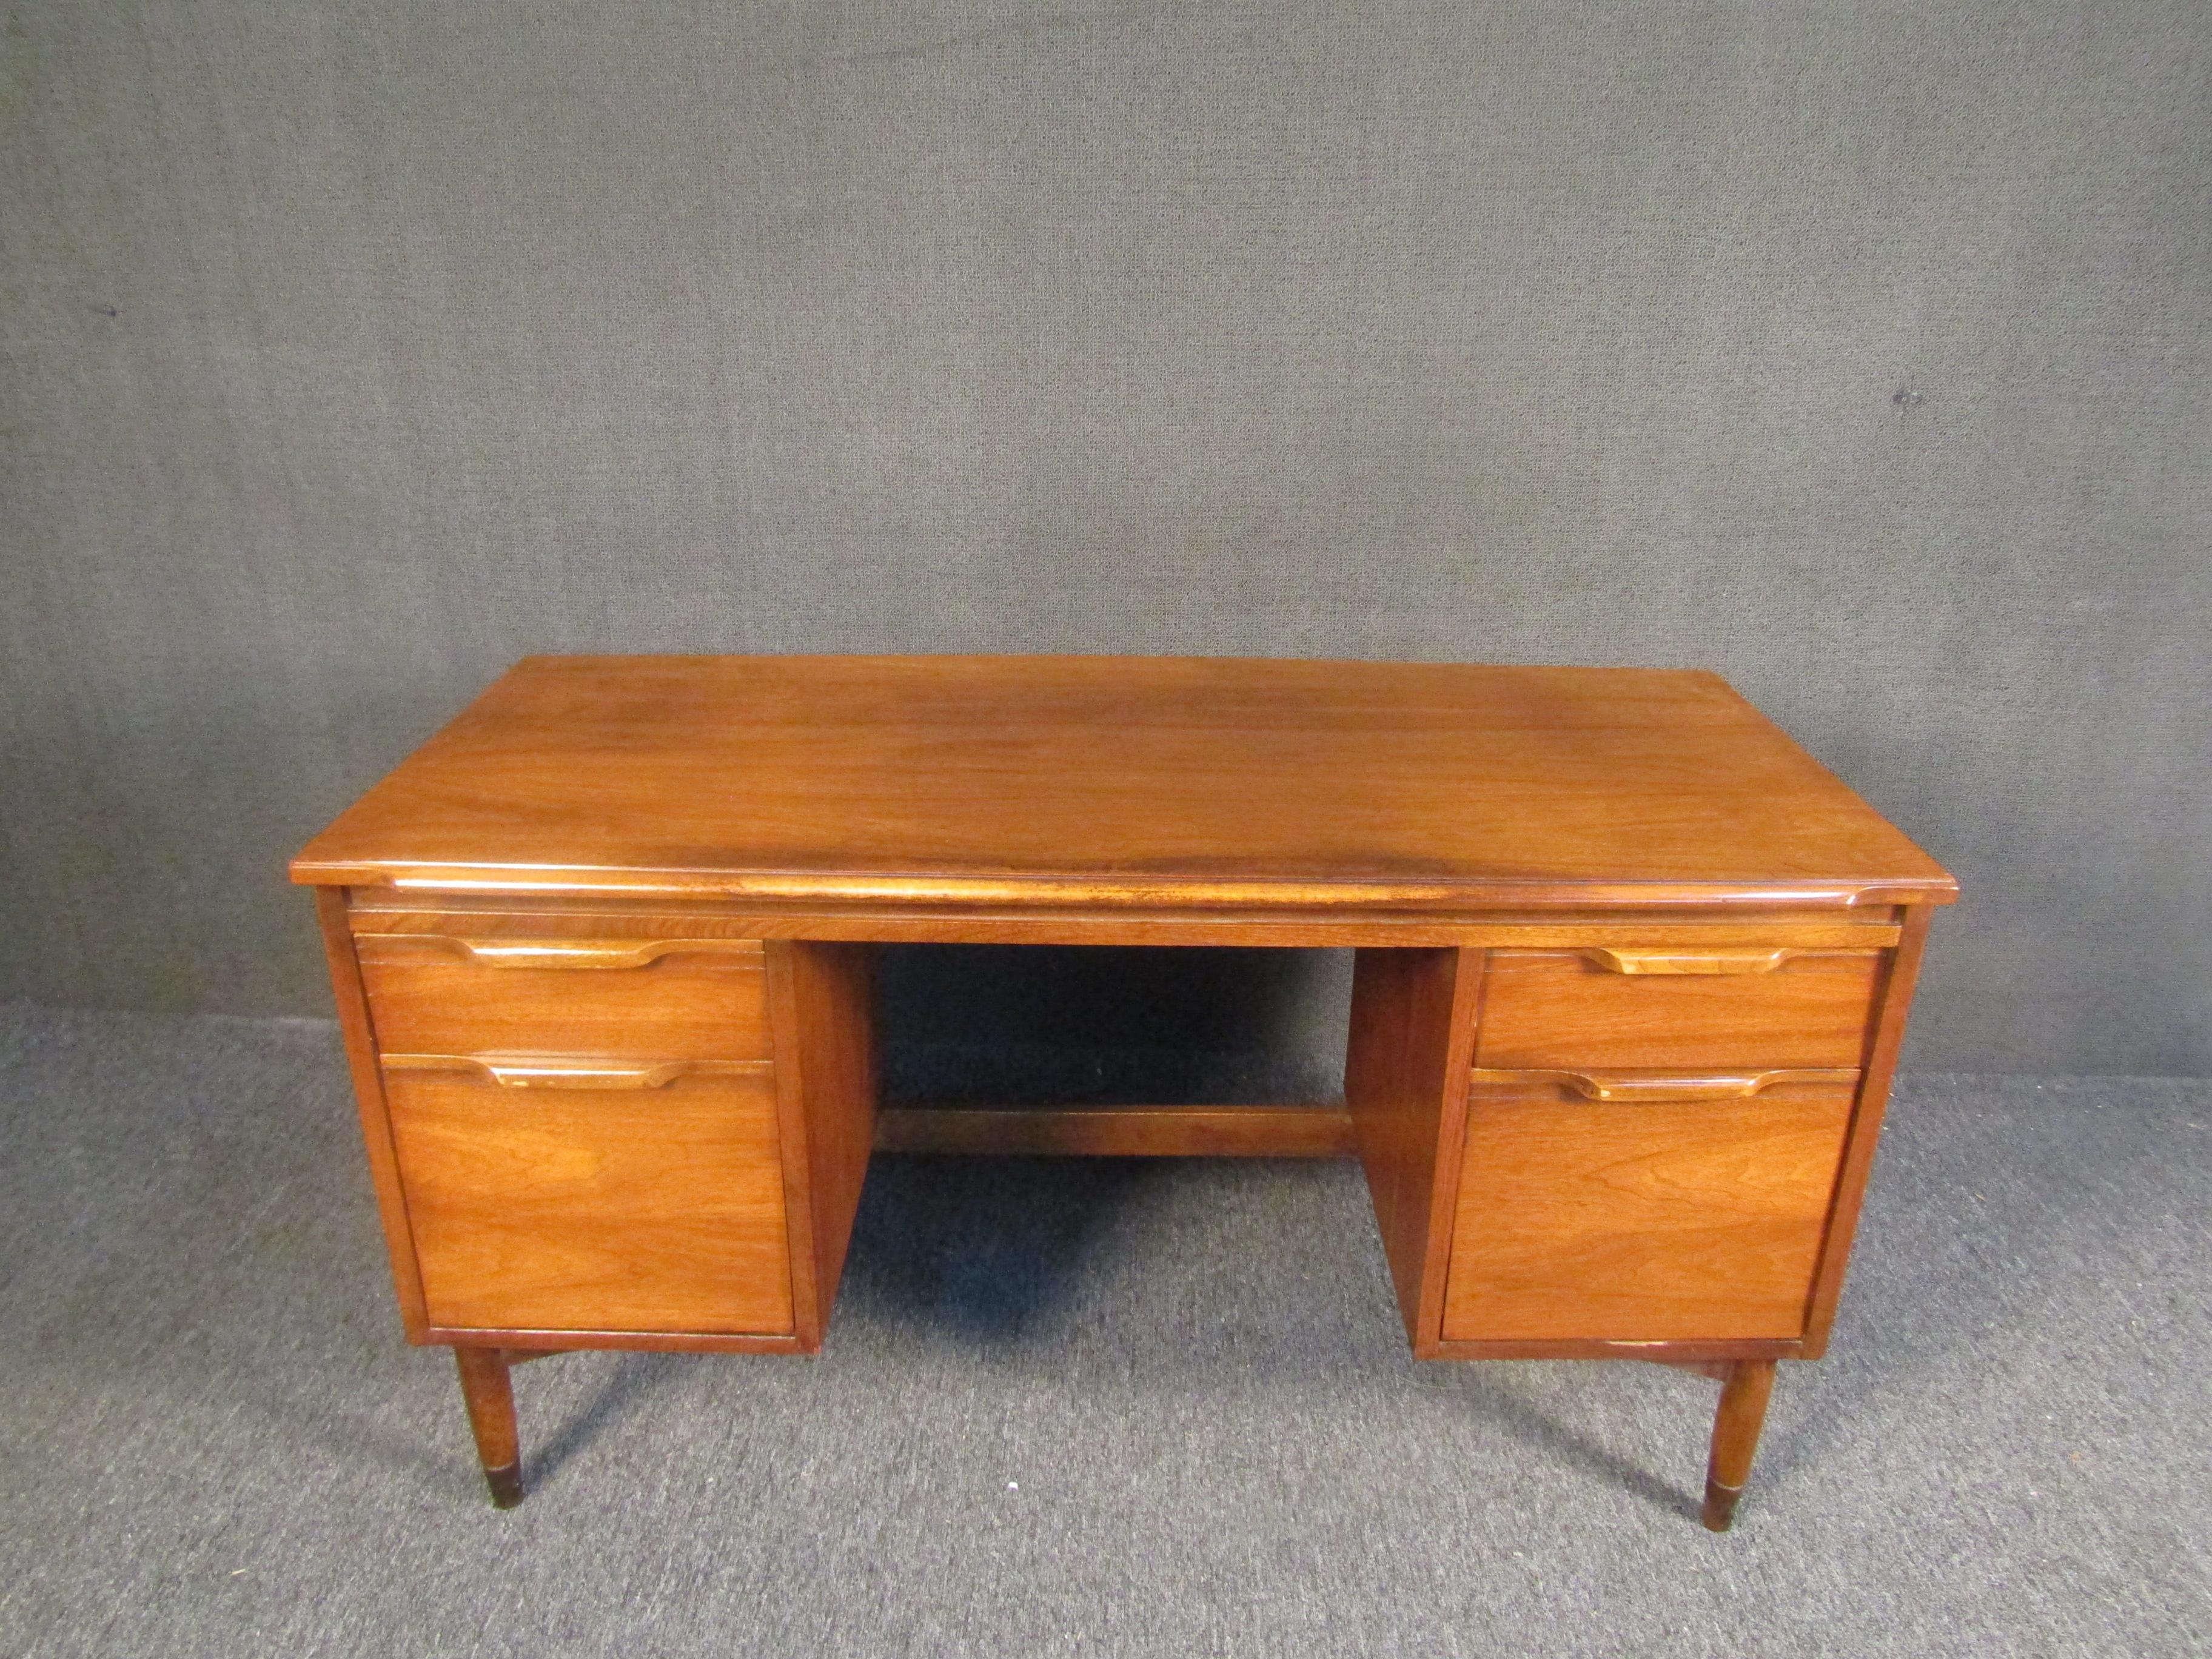 Vintage writing desk with a radiant walnut woodgrain and spacious drawers for filing papers or storing items. Sculpted legs and brass footing add an element of Mid-Century Modern style to this elegant and well-made desk. Please confirm item location